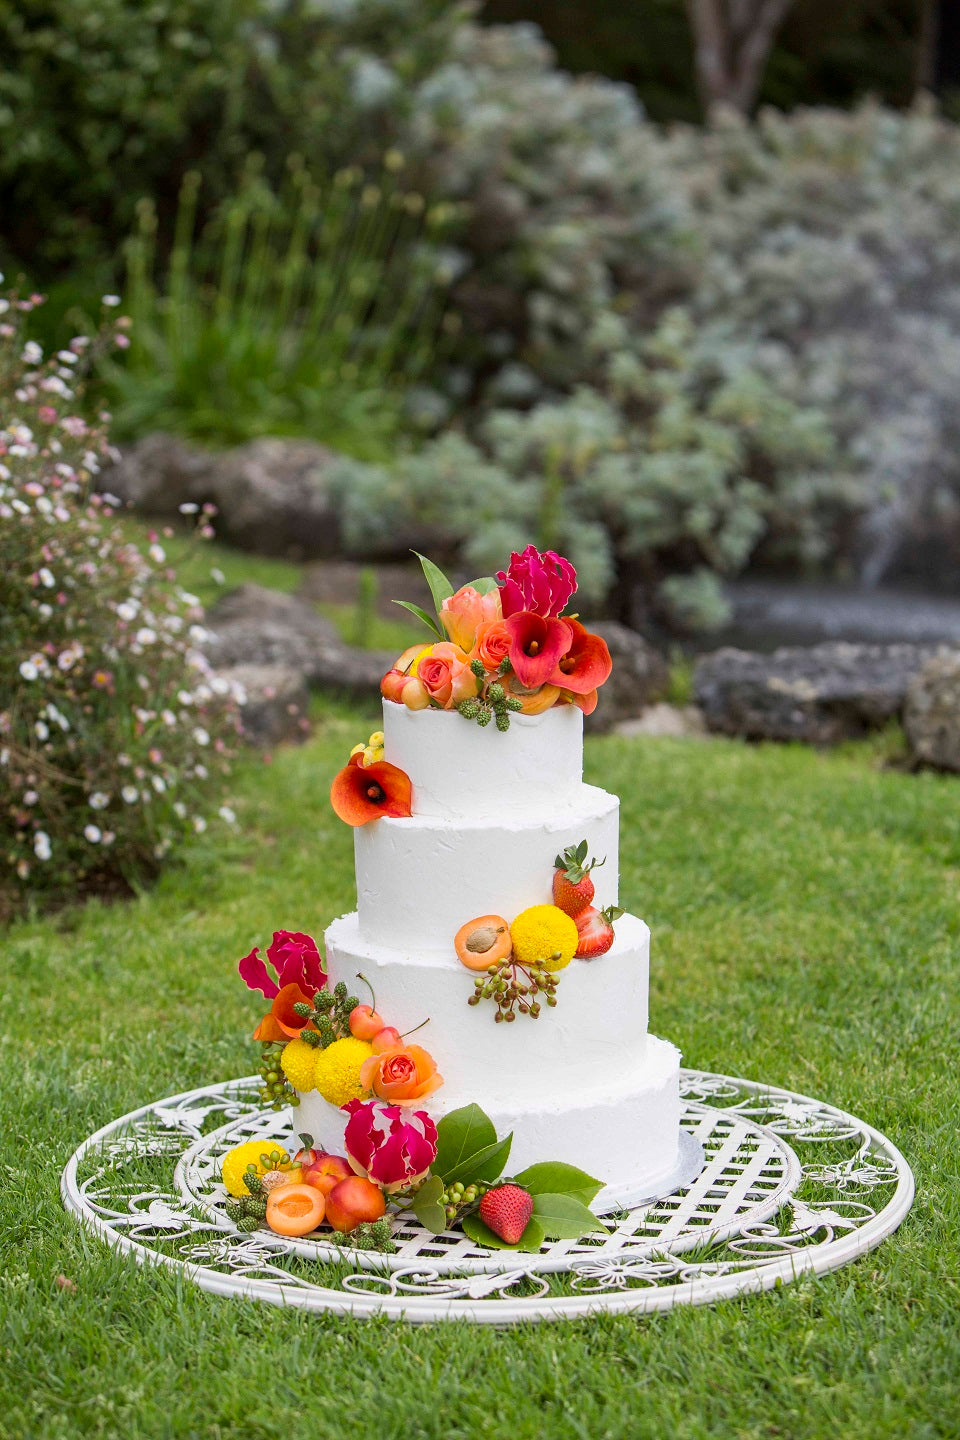 Hanging 4 Tier Cake With Fruits and Bright Colour Flowers